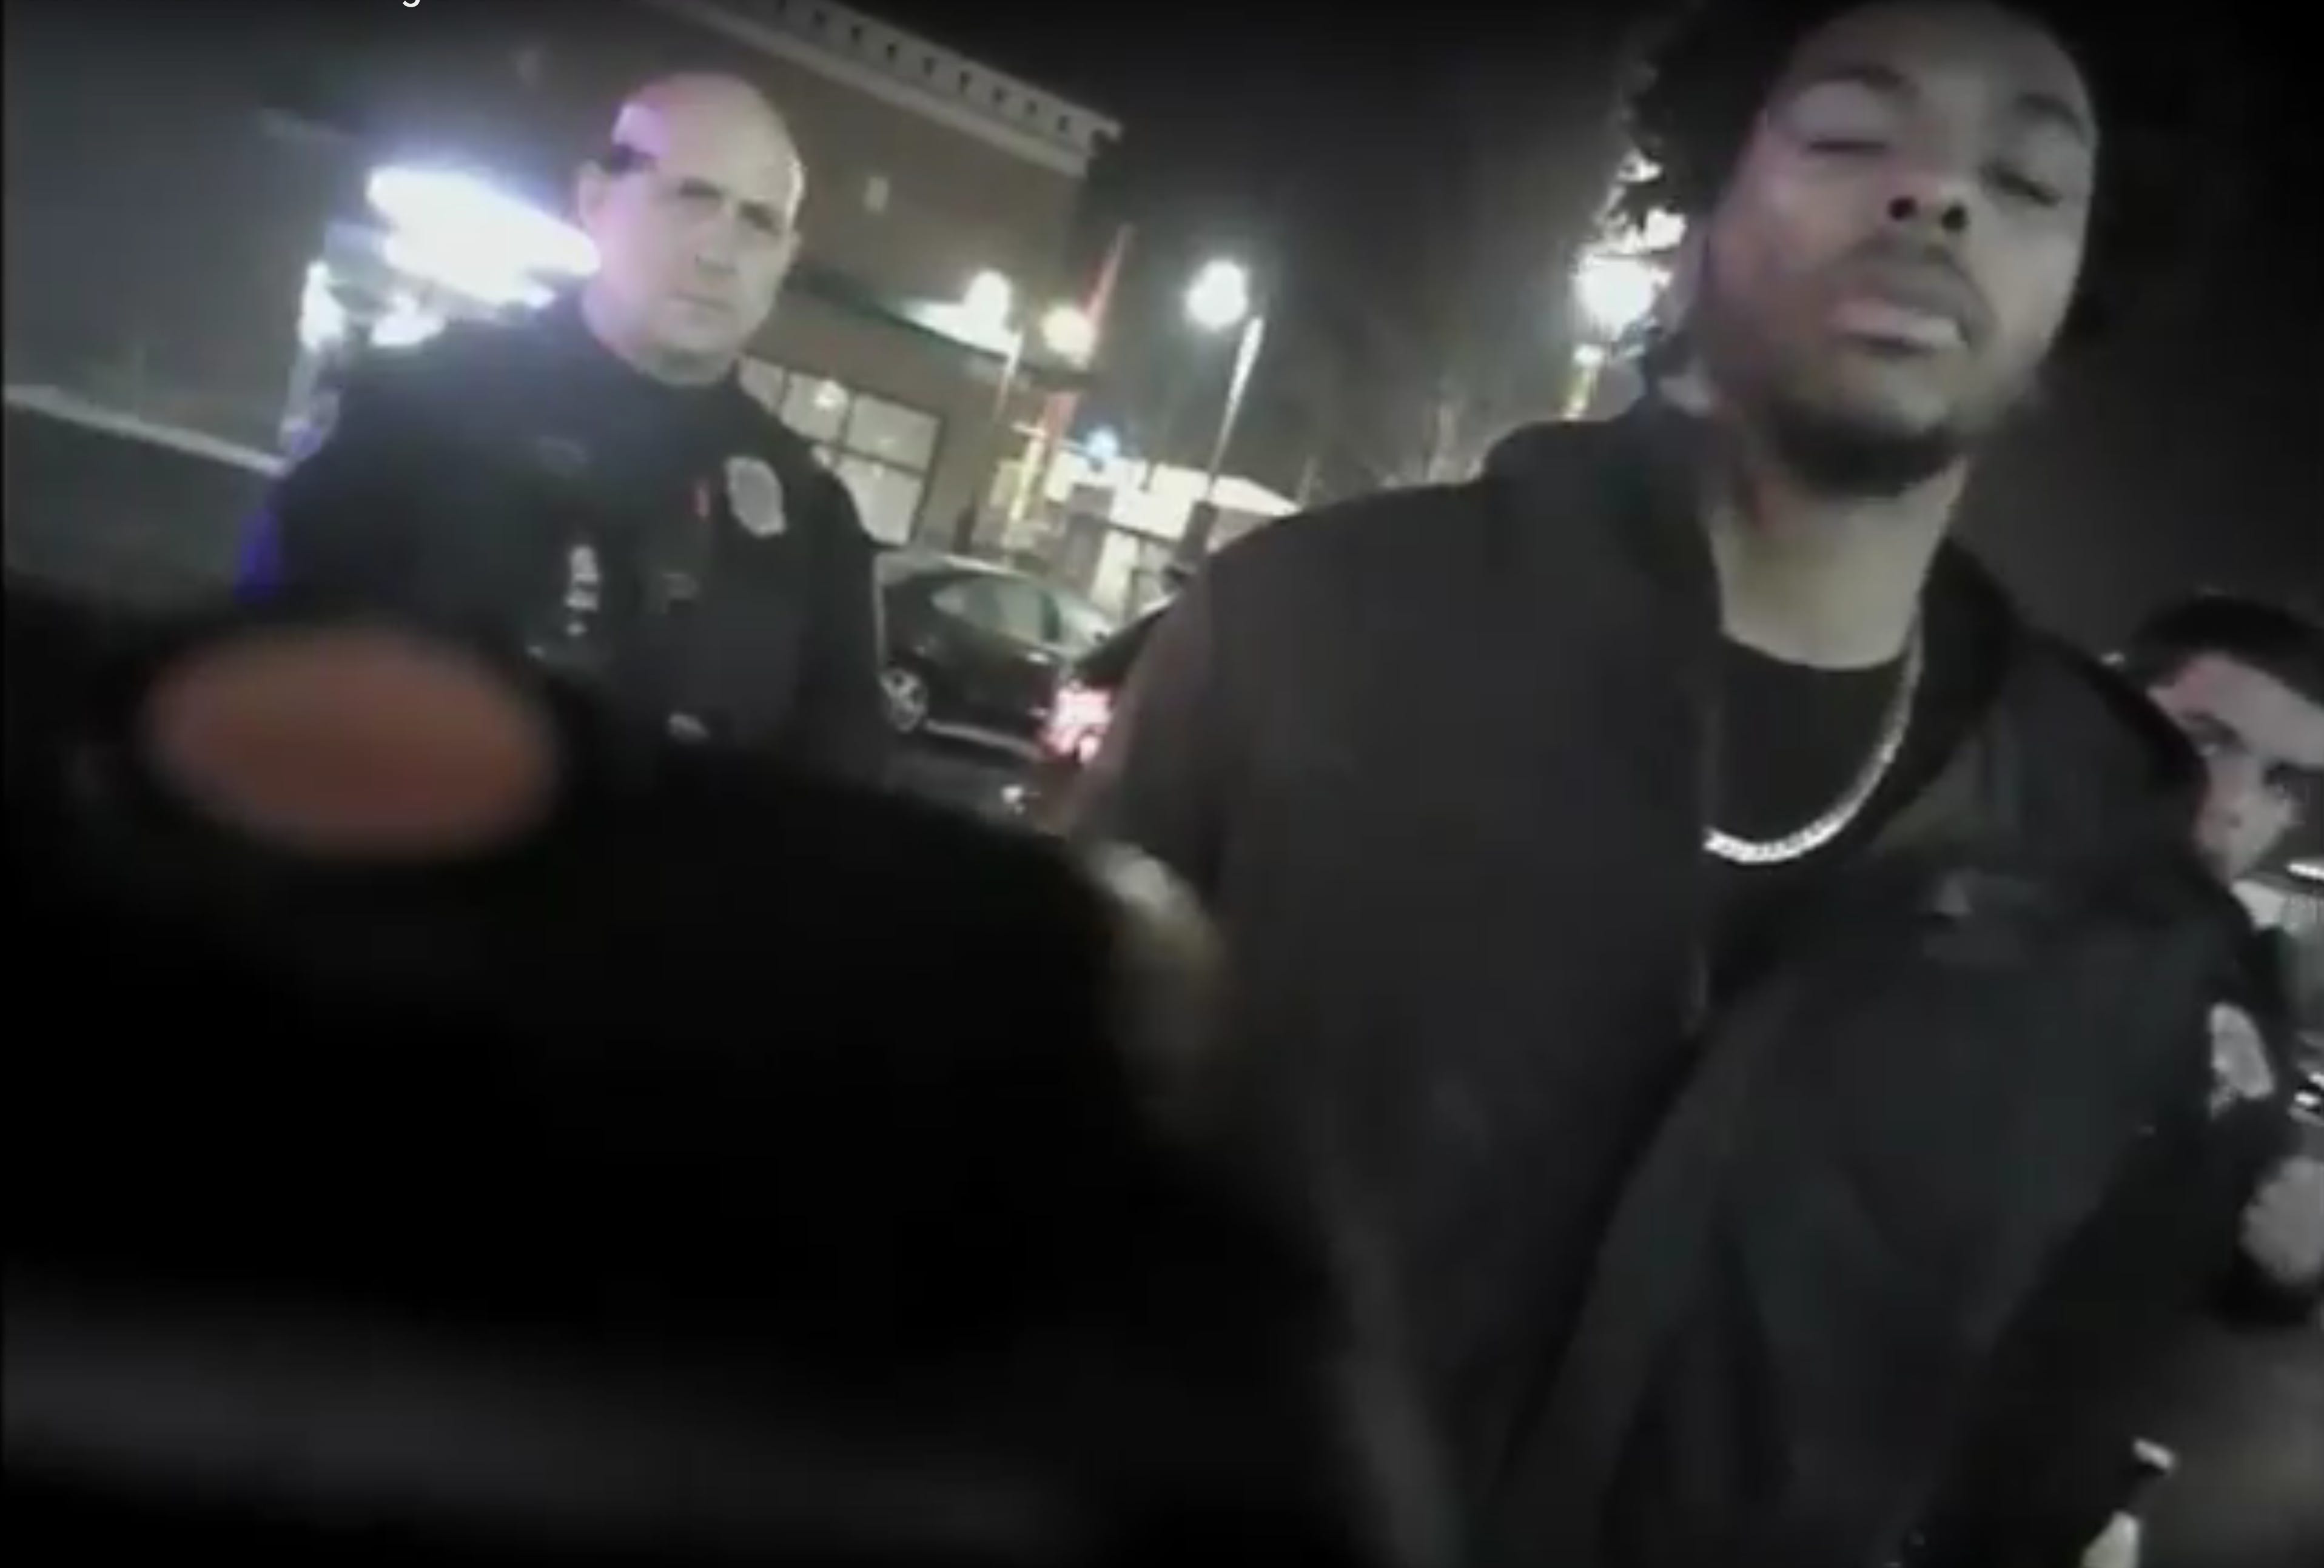 Milwaukee Bucks player Sterling Brown was wrongfully arrested by Milwaukee police in 2018.